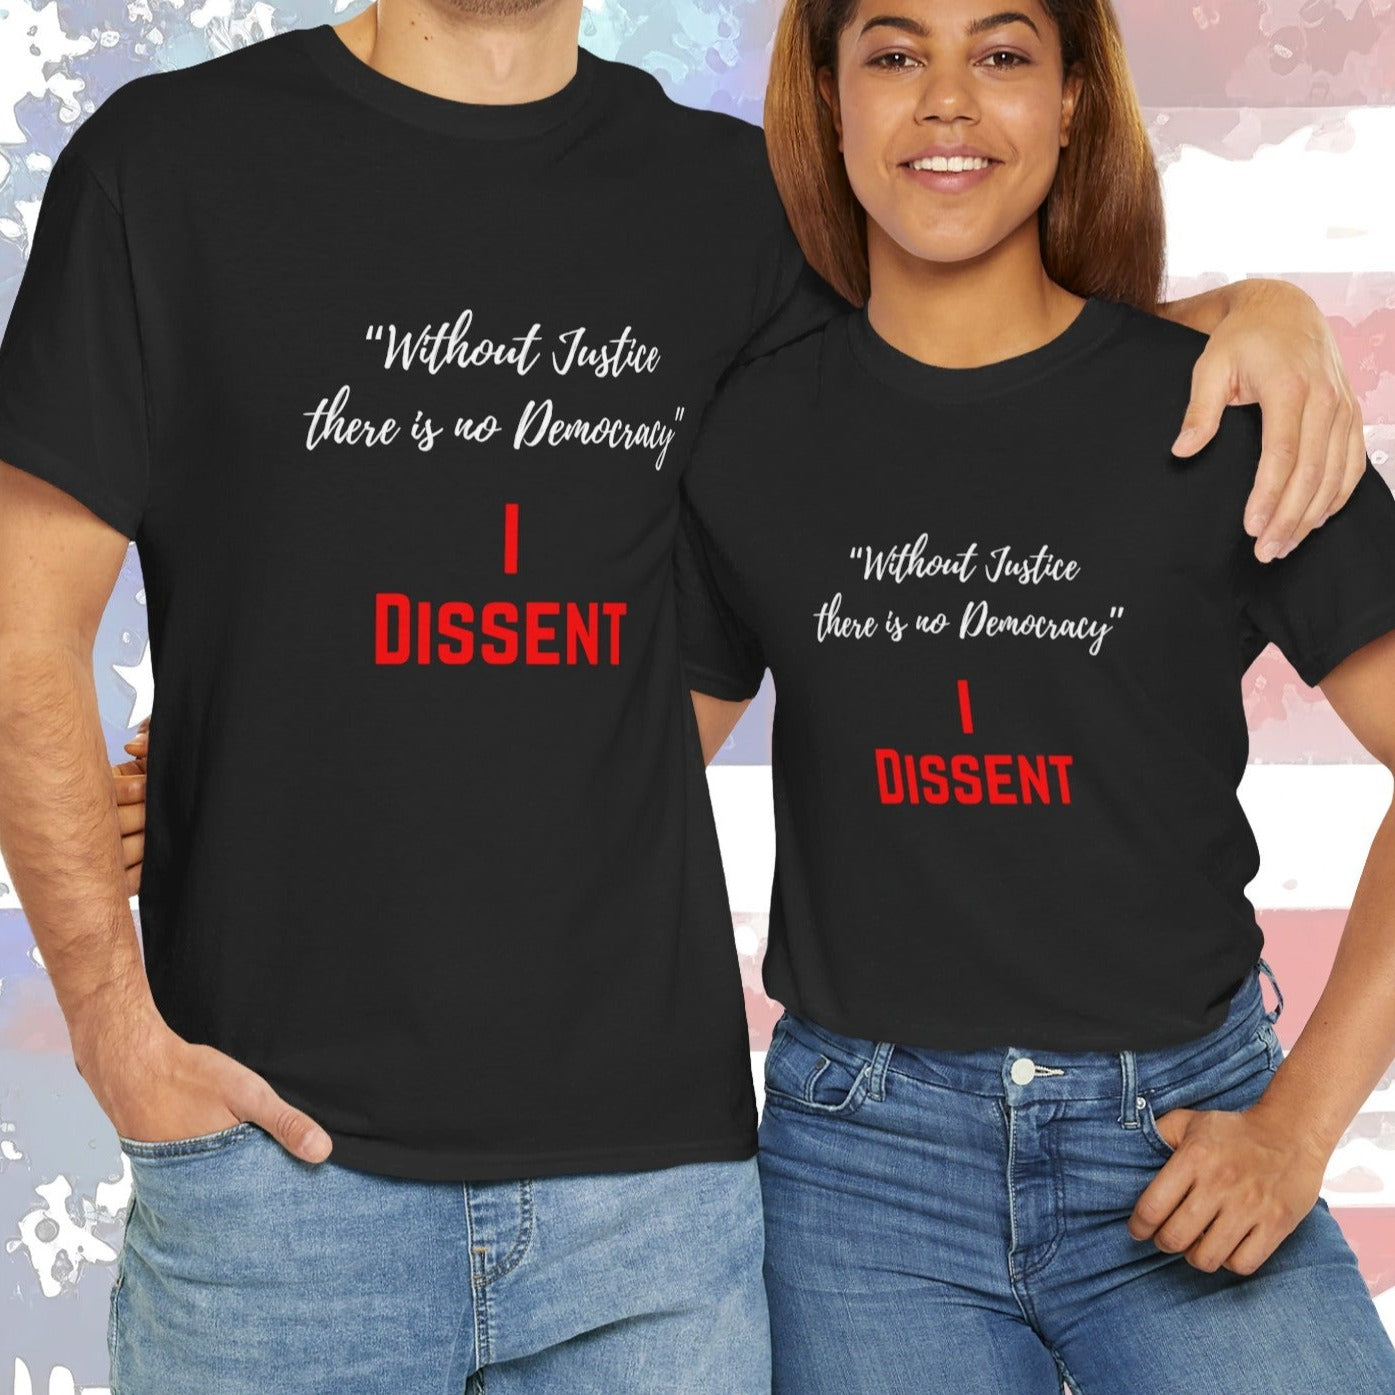 I Dissent, "Without Justice No Democracy" SCOTUS Rulings, Justice Above the Law - FlooredByArt